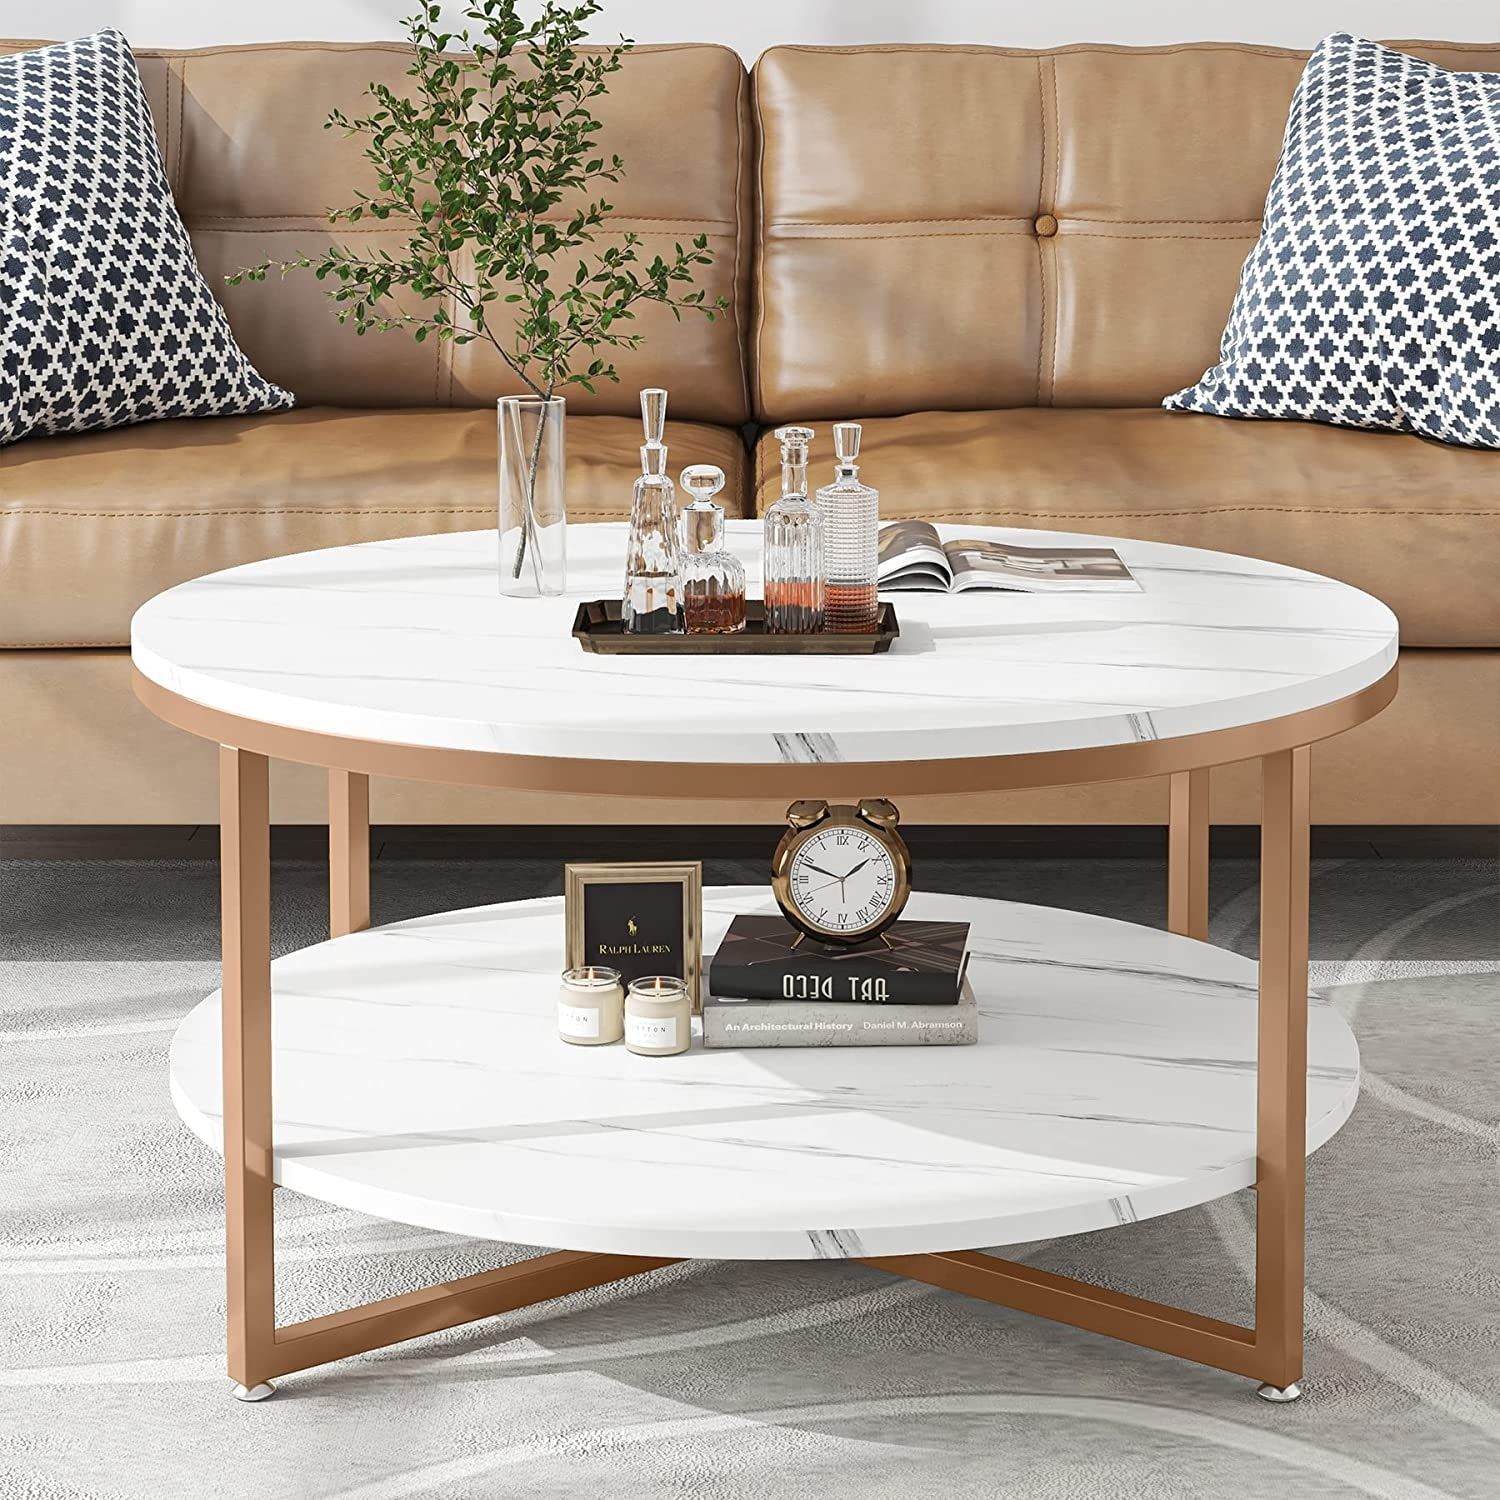 Two Tier Round Faux Marble Modern Coffee Table With Metal Legs And Open  Storage Shelf For Living Room, White Gold – Bed Bath & Beyond – 37593828 Within Coffee Tables With Open Storage Shelves (View 9 of 15)